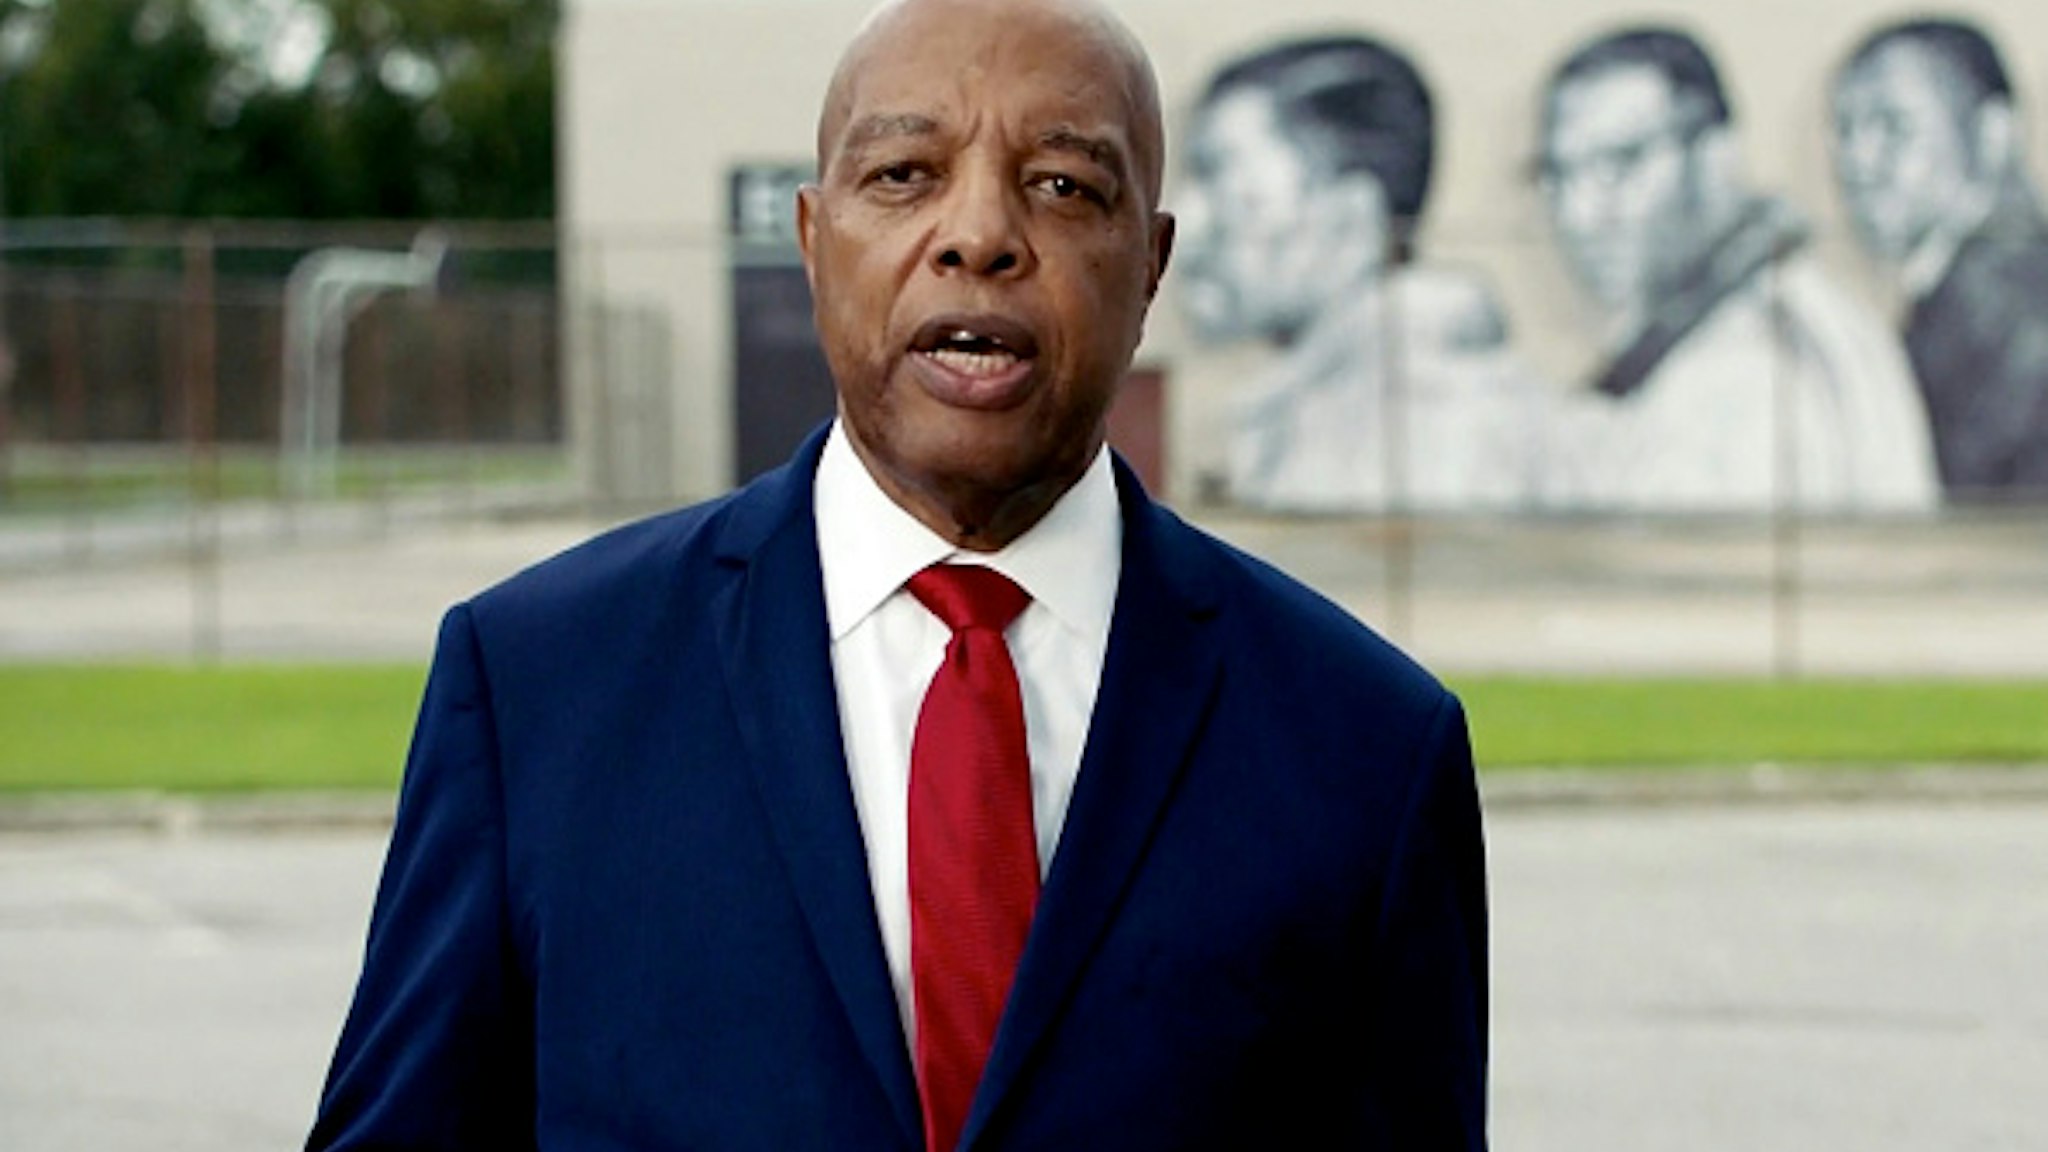 CHARLOTTE, NC - AUGUST 26: (EDITORIAL USE ONLY) In this screenshot from the RNC’s livestream of the 2020 Republican National Convention, civil rights activist Clarence Henderson addresses the virtual convention on August 26, 2020. The convention is being held virtually due to the coronavirus pandemic but will include speeches from various locations including Charlotte, North Carolina and Washington, DC.